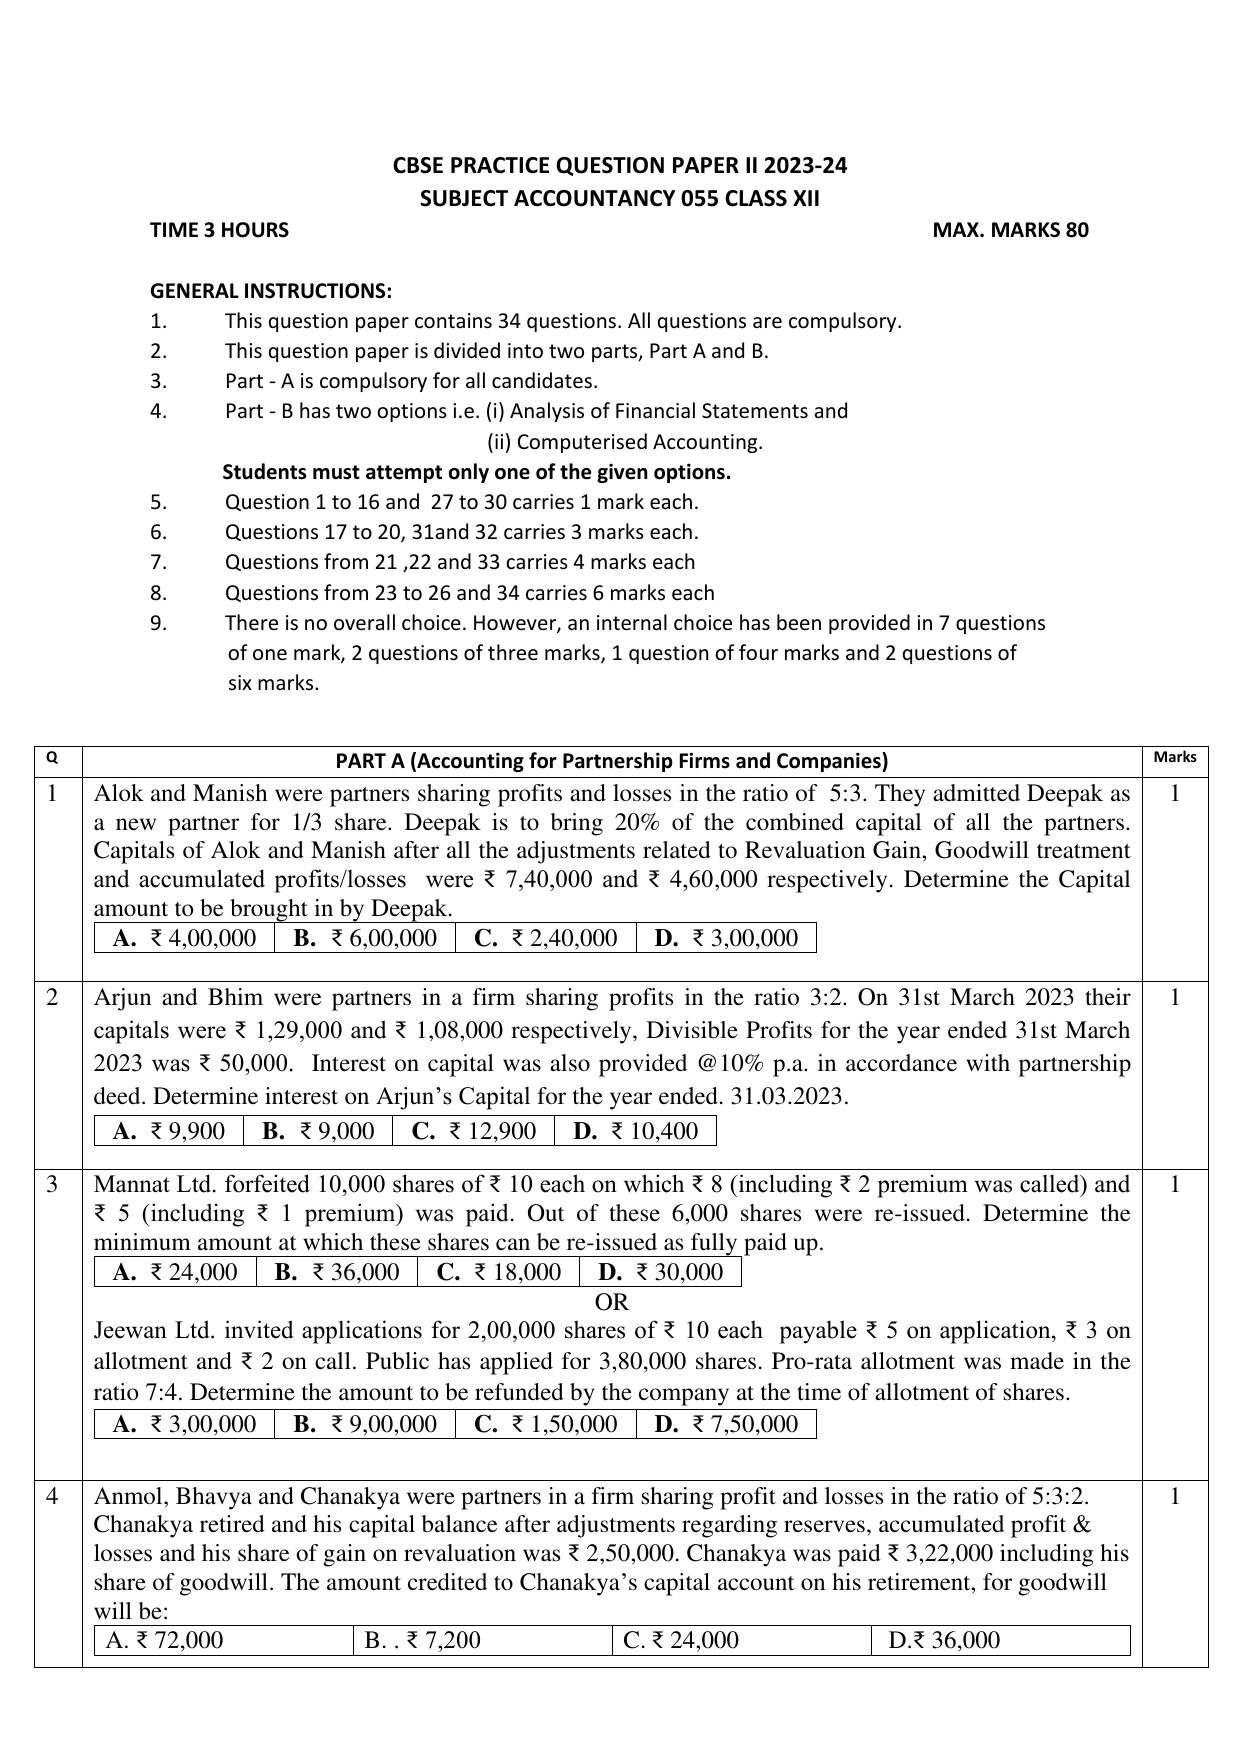 CBSE Class 12 Accountancy SET 2 Practice Questions 2023-24  - Page 1